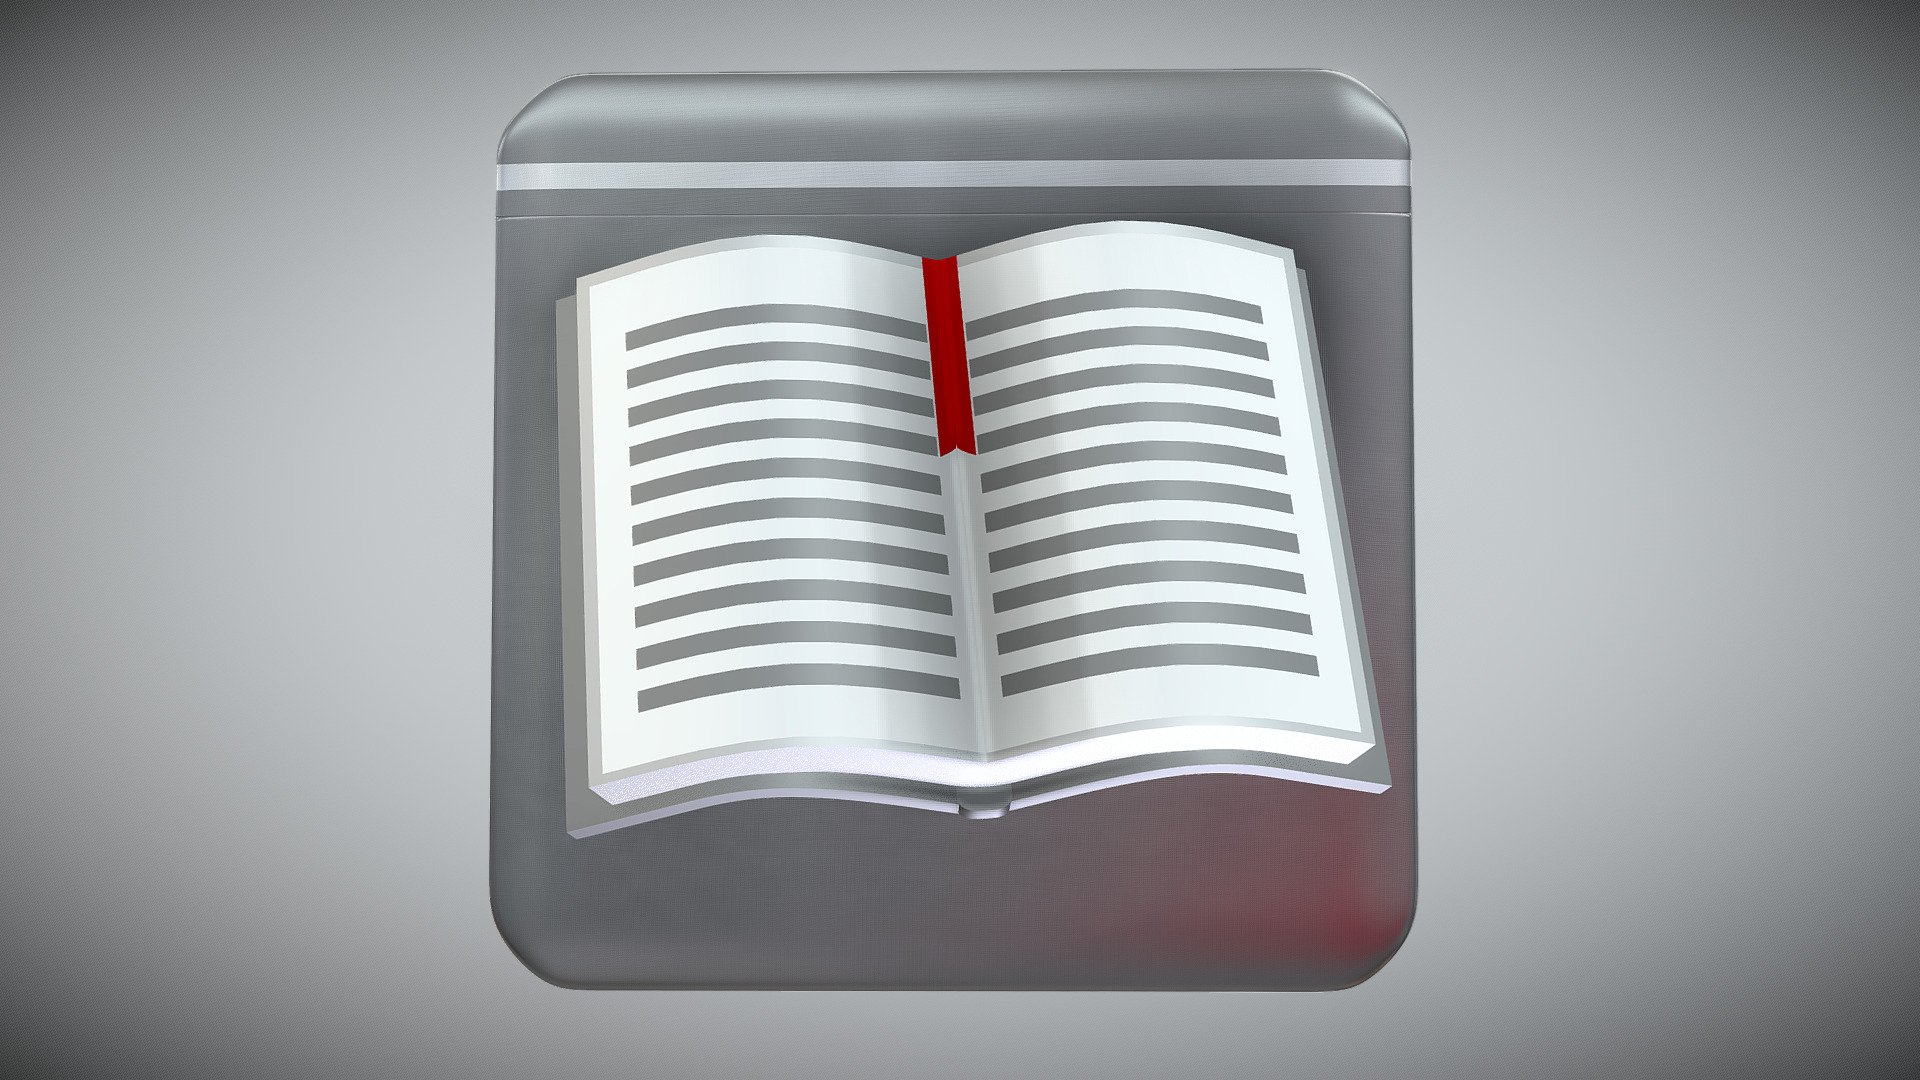 Here is a simple 3d book icon 3d model